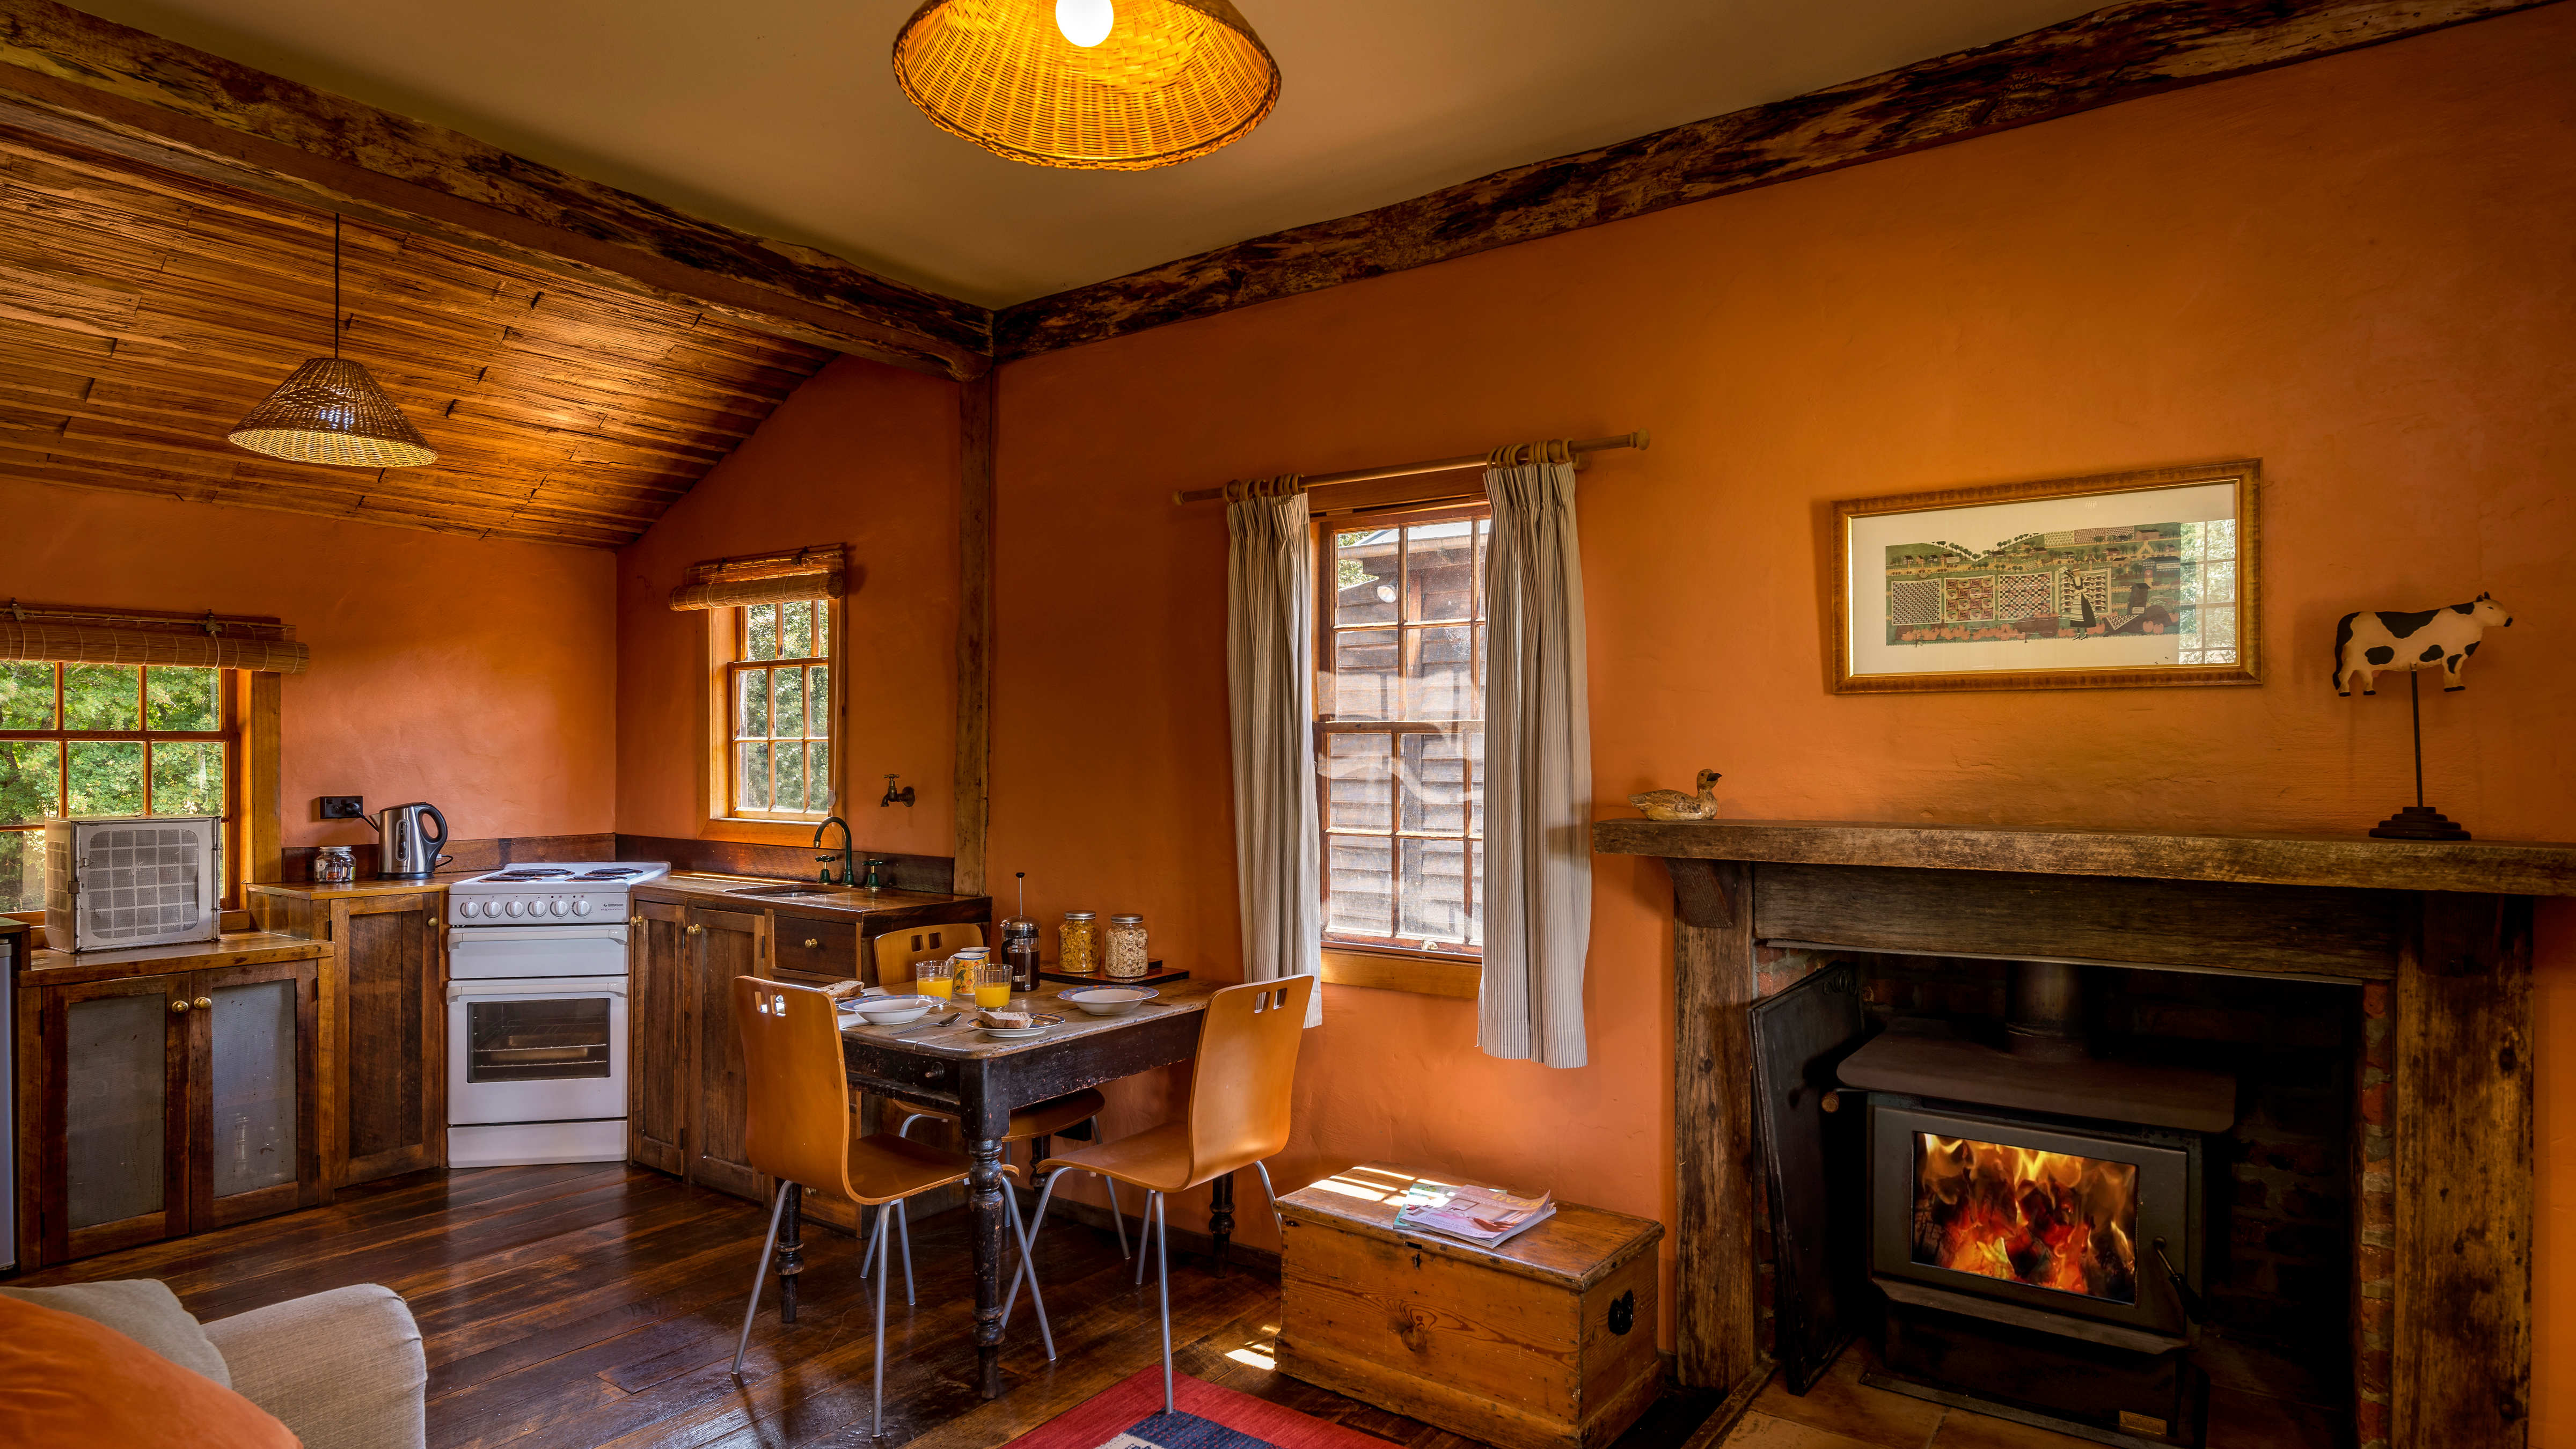 The open plan farmhouse kitchen has timber cupboards and table and chairs are bordered by georgian paned windows and terracotta painted walls. The table is laid with breakfast provisions including jars of cereal, glasses of orange juice, bowls and plates with toast and a coffee plunger. To the right of the image is the wood heater which is alight with orange flames. The rough timber fireplace surround has a picture hanging above and decorator items on the mantle. A pine timber box sits between the fire and the kitchen dining table. Photo: Rob Burnett.